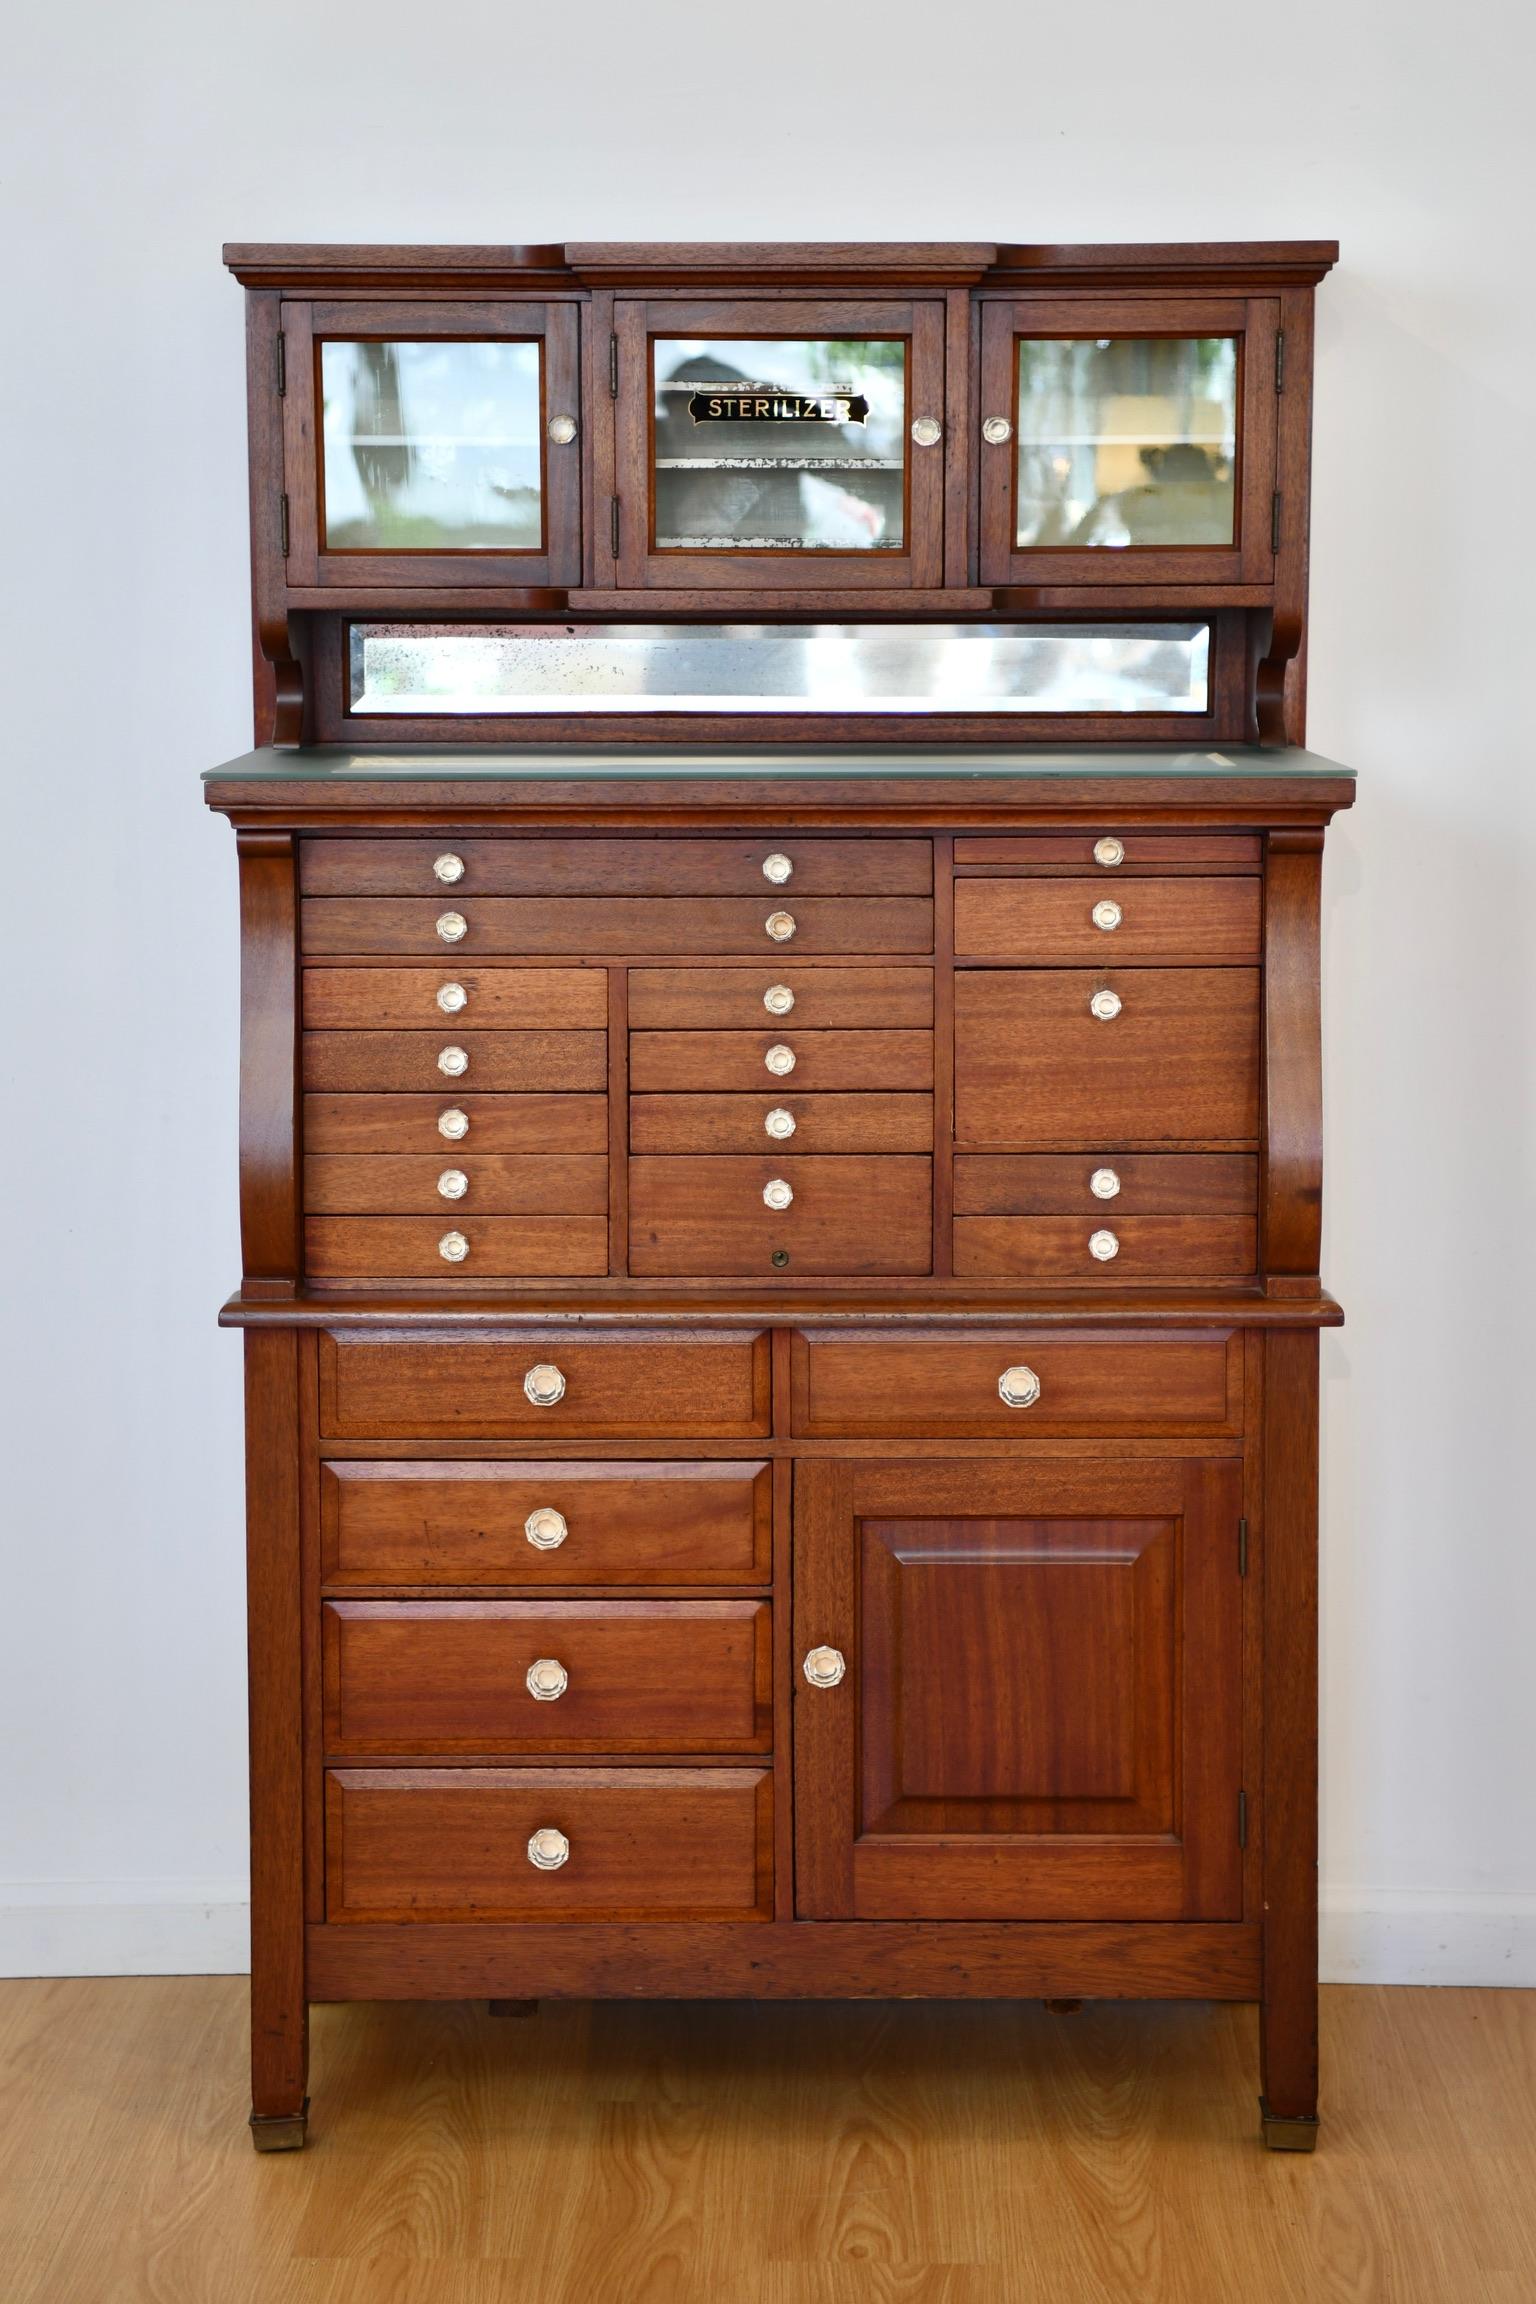 Antique mahogany dental cabinet fitted with twenty-one drawers, four cupboards, and frosted glass top, by American Cabinet Co and circa early 20th century. Dimensions: 61.25